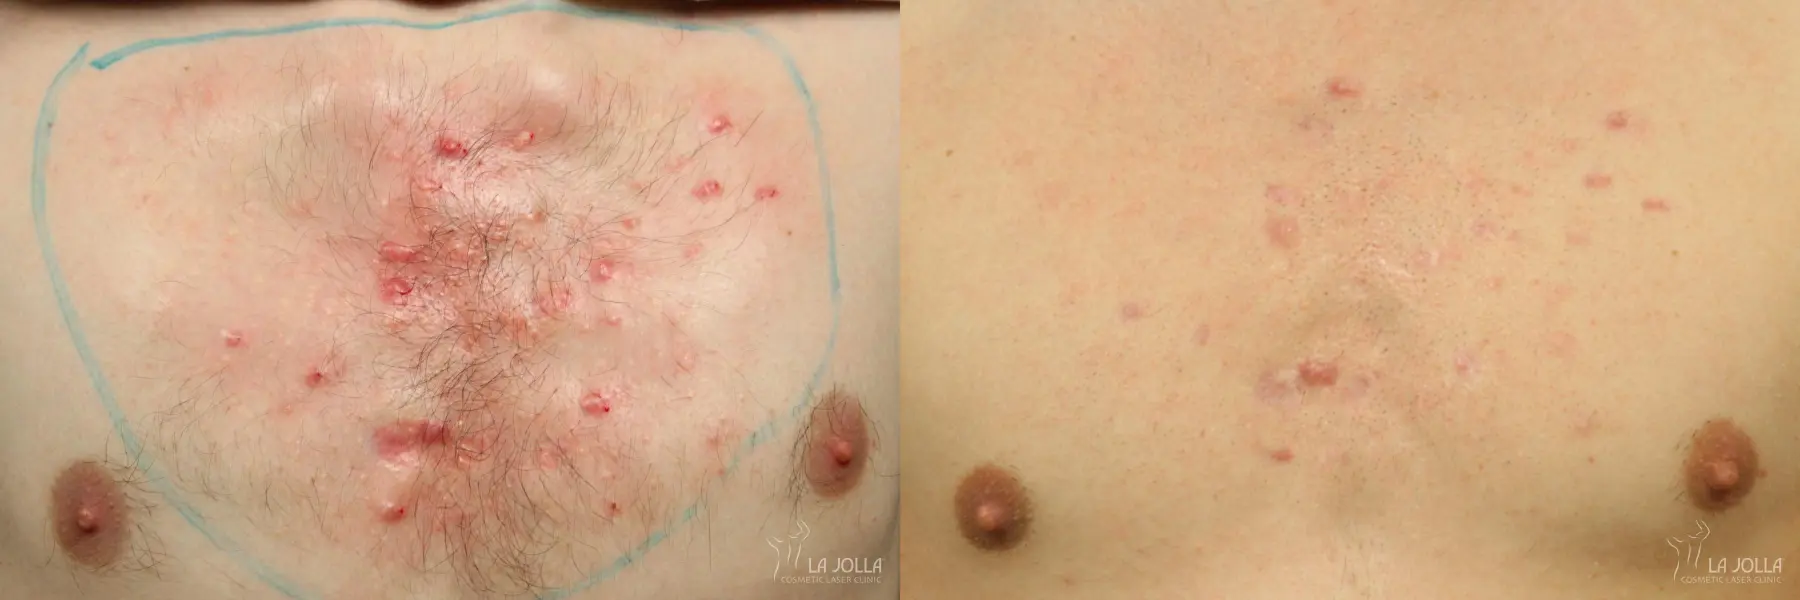 Fraxel®: Patient 2 - Before and After  